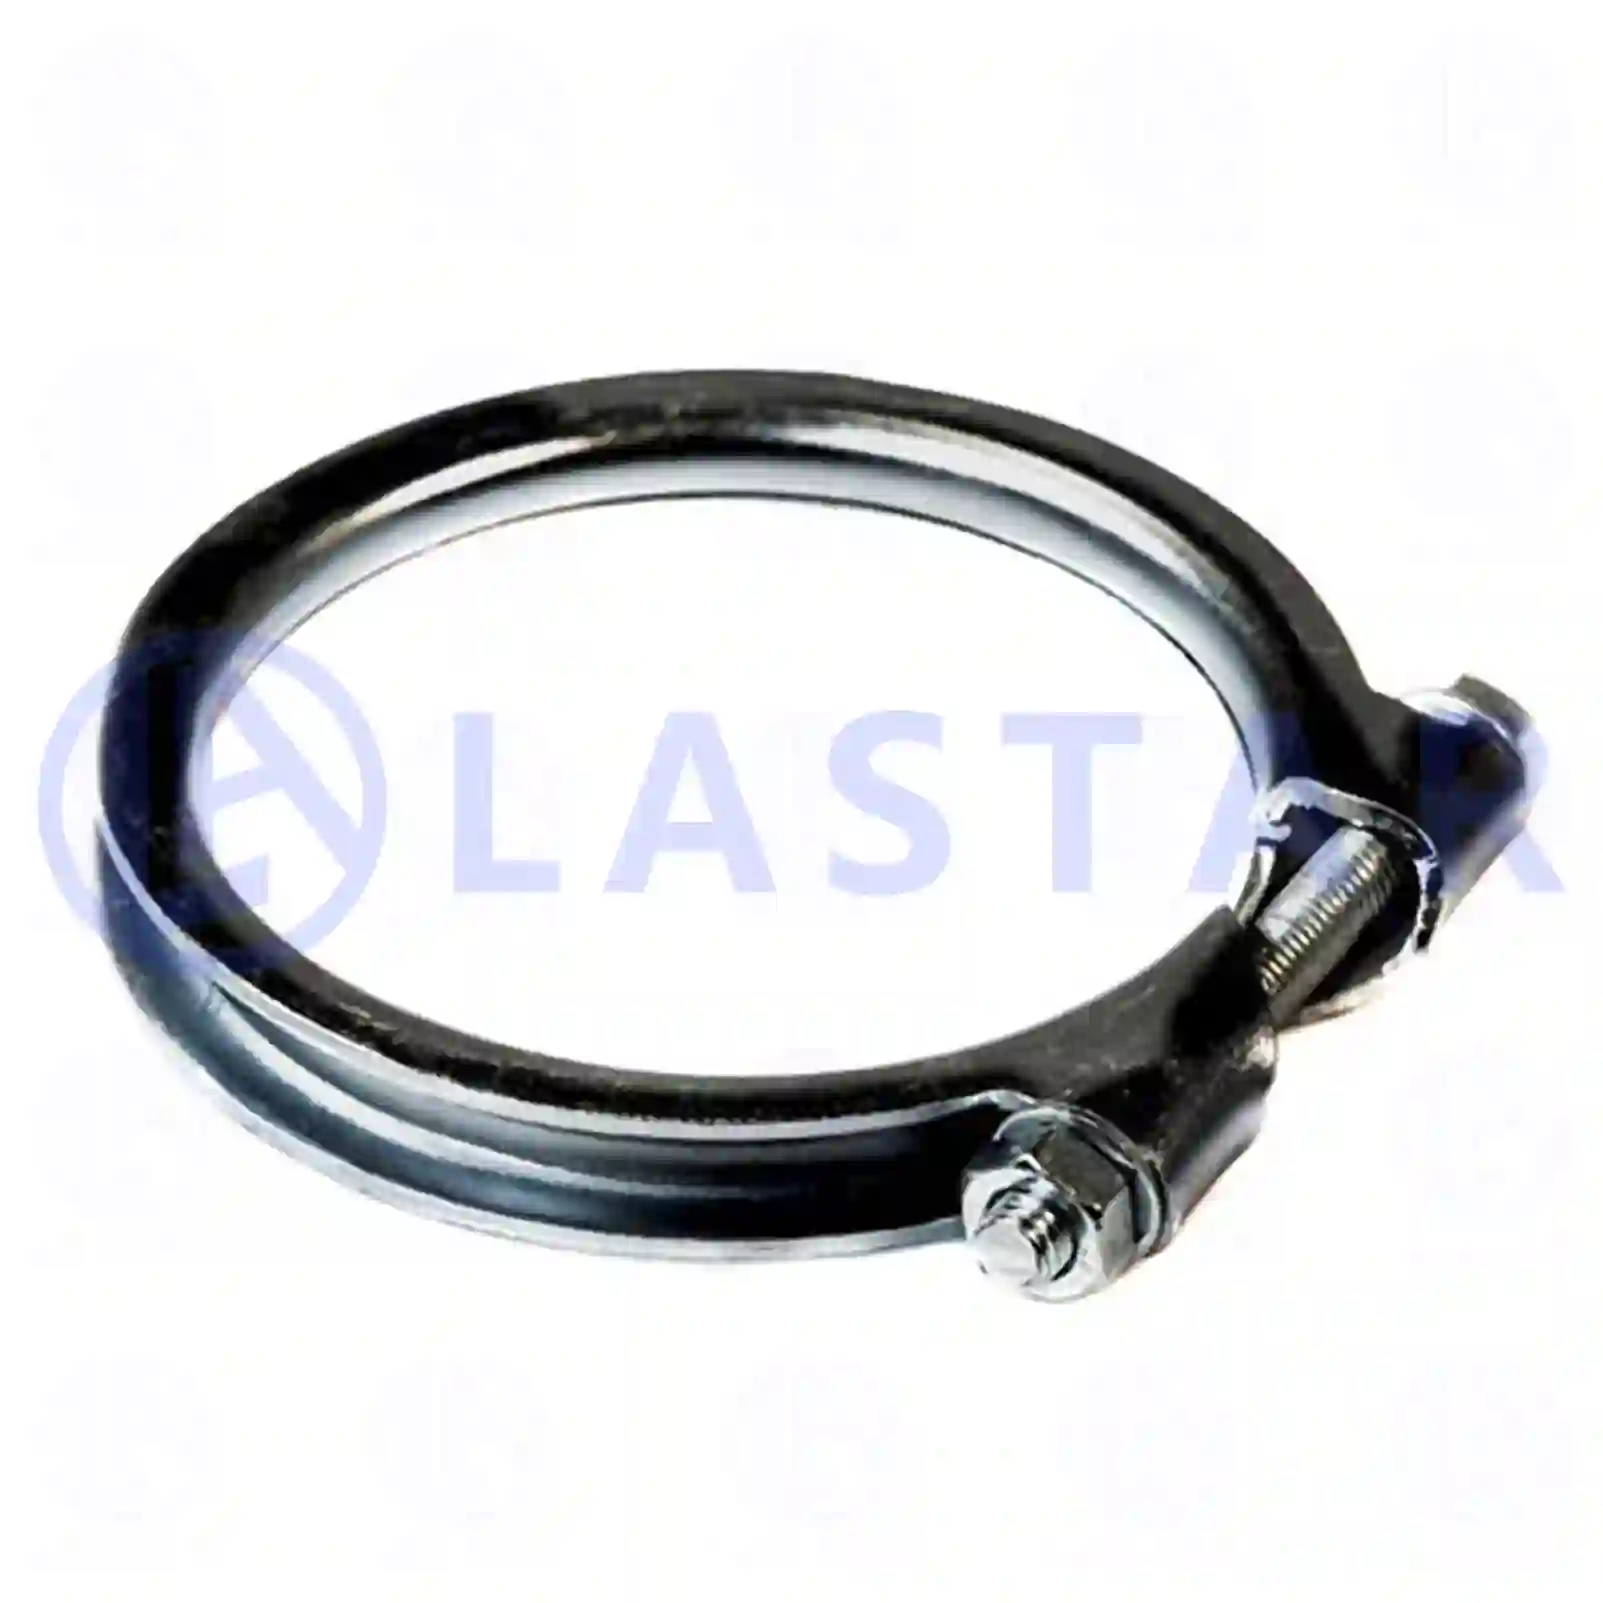 Clamp, 77706708, 1605016, 1624612, 508850, 9522768, ZG10259-0008 ||  77706708 Lastar Spare Part | Truck Spare Parts, Auotomotive Spare Parts Clamp, 77706708, 1605016, 1624612, 508850, 9522768, ZG10259-0008 ||  77706708 Lastar Spare Part | Truck Spare Parts, Auotomotive Spare Parts